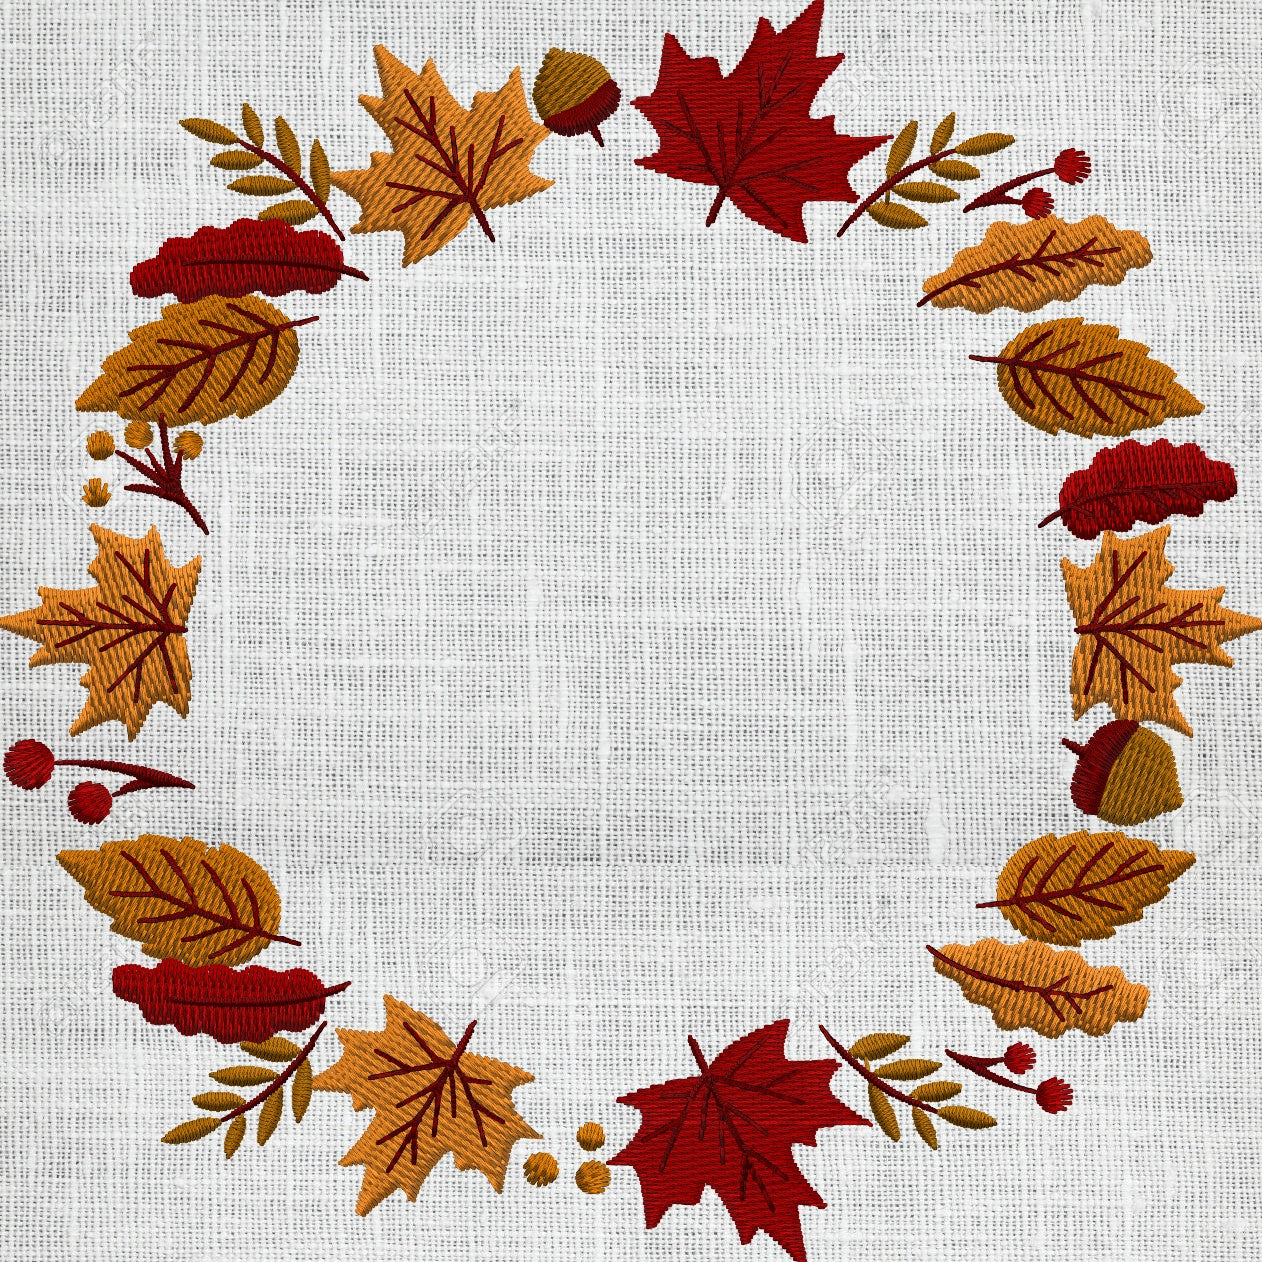 Autumn Wreath Frame with Leaves and Acorns EMBROIDERY DESIGN FILE- Instant download - Hus Exp Jef Vp3 Pes Dst formats 2 sizes 5 colors